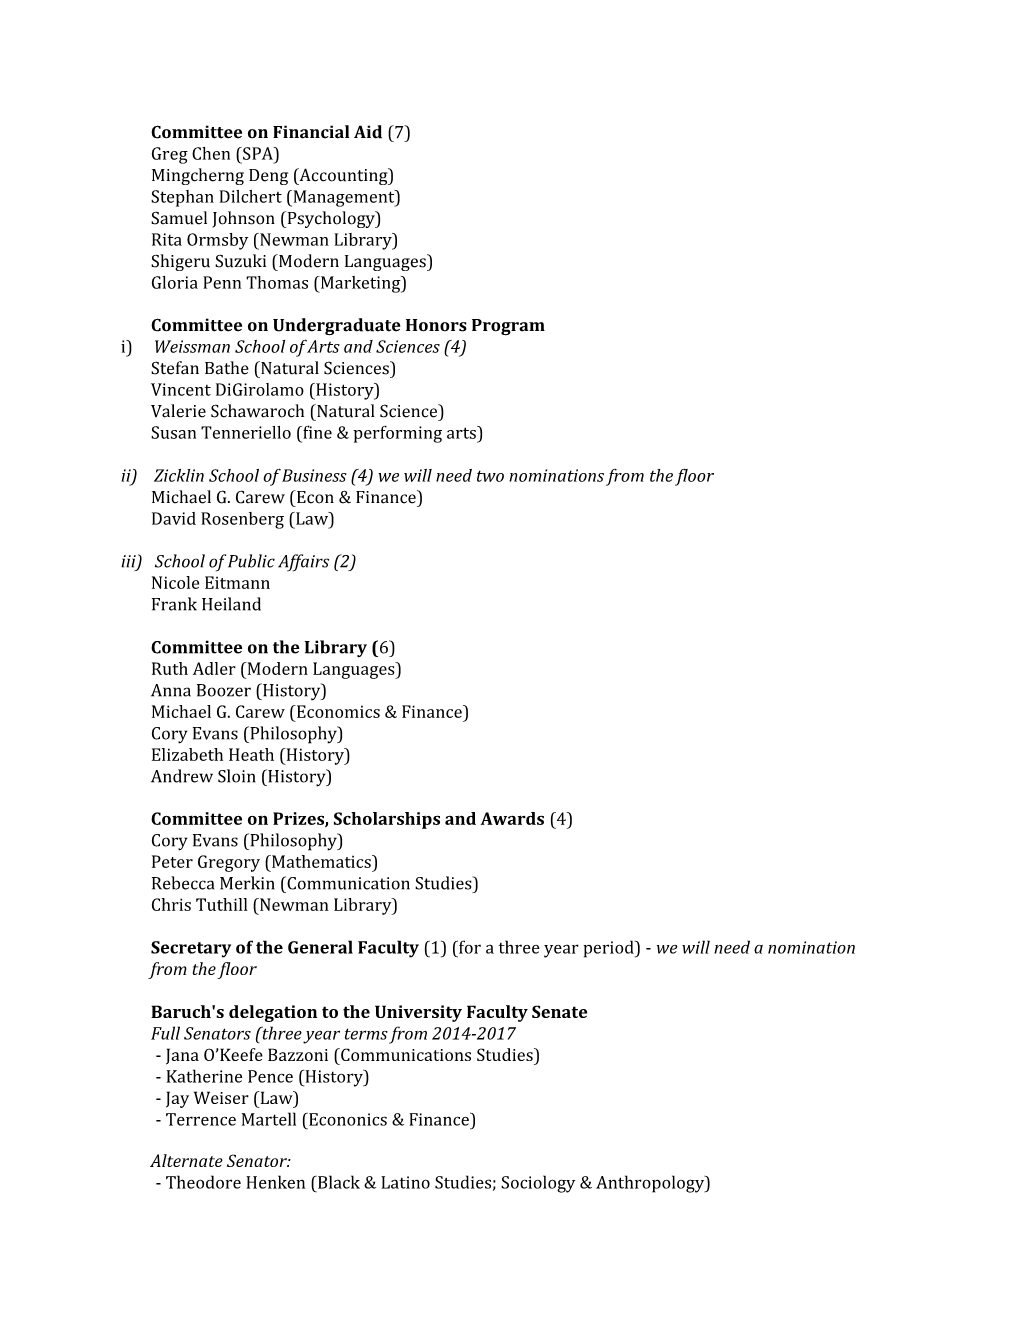 General Faculty Committees Nominations 2014 - 2016